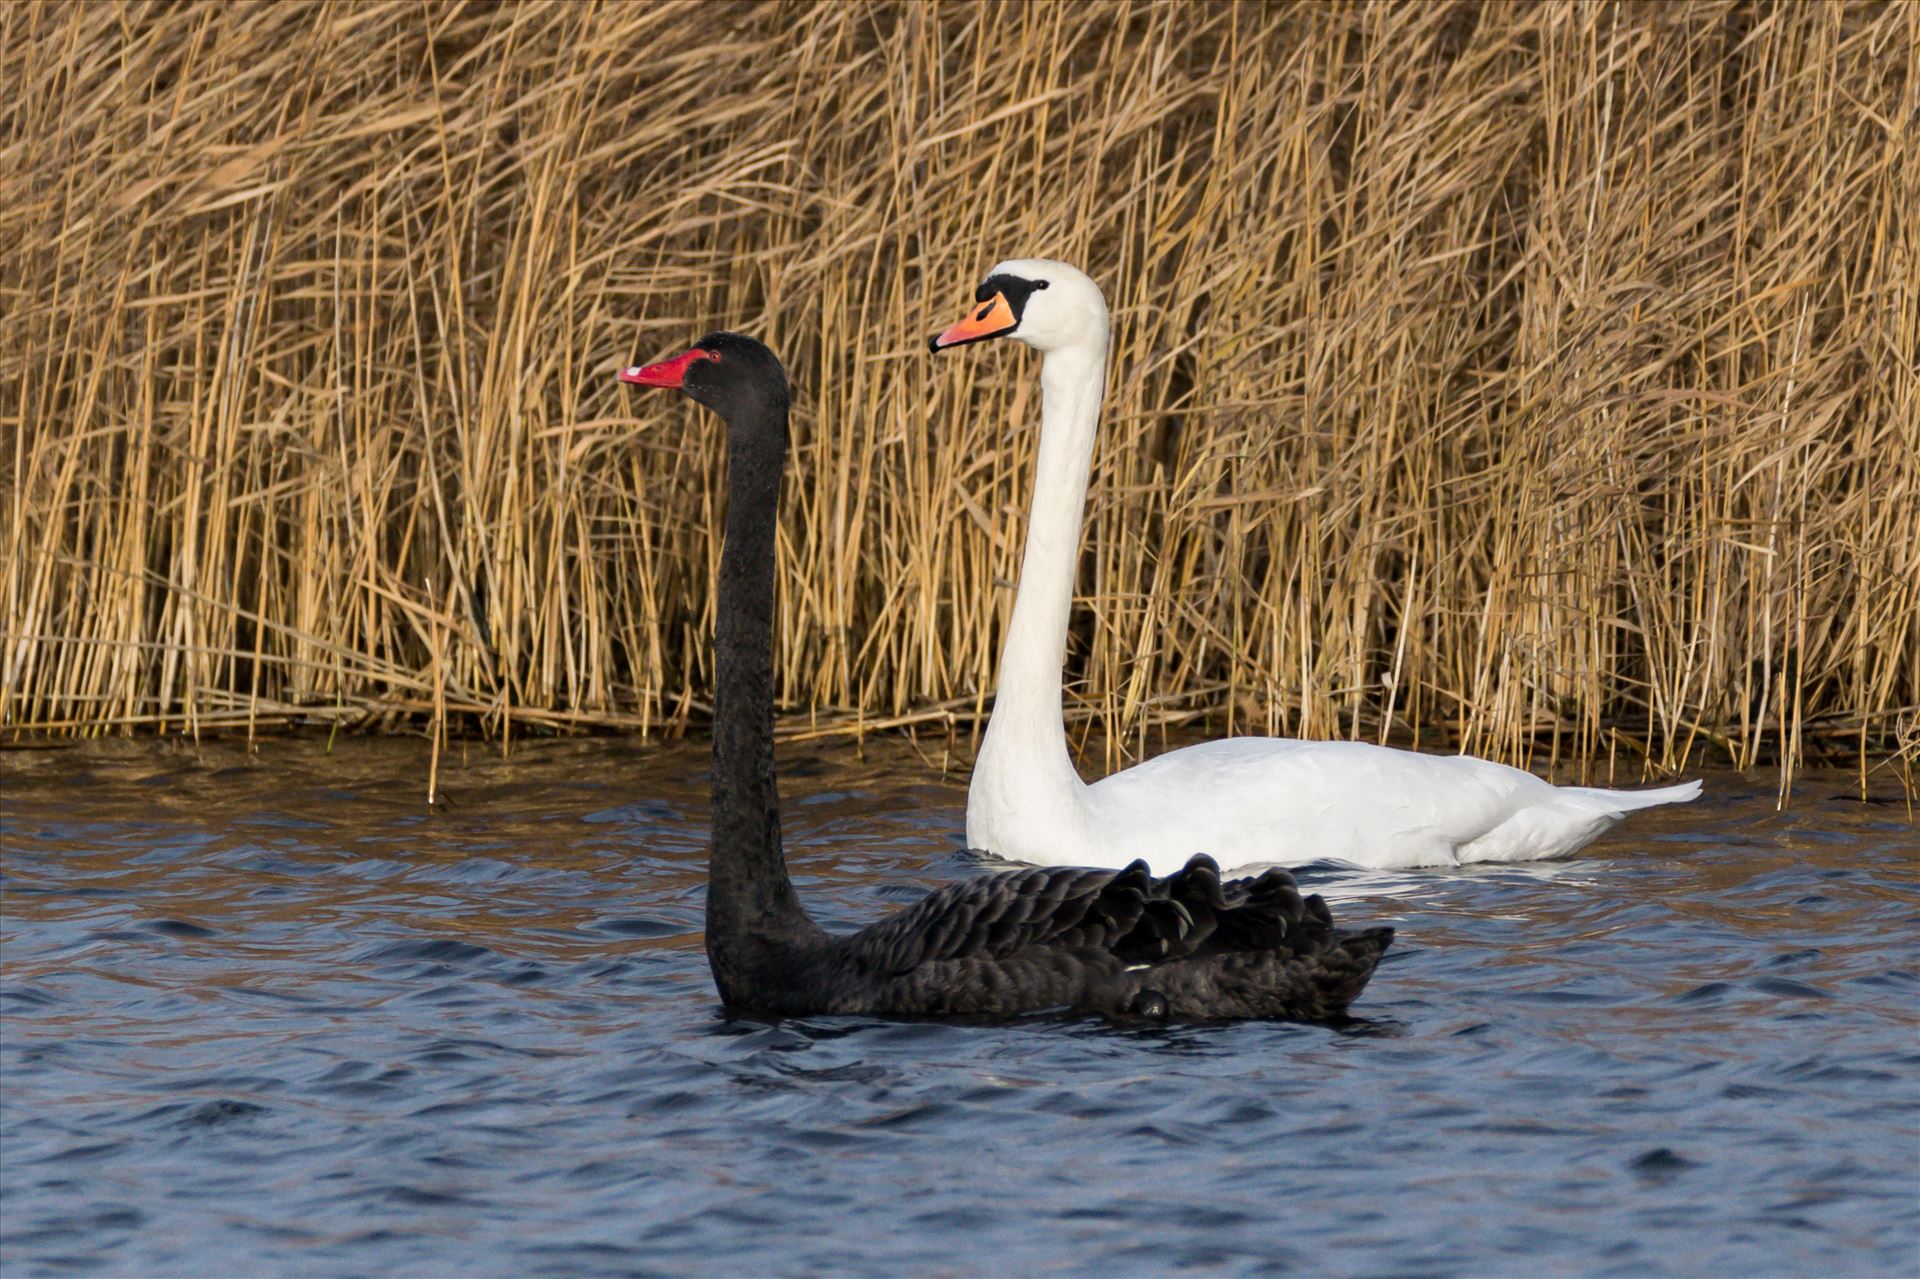 Black and White Swan RSPB Saltholme Black and White Swans, hardly ever see them together, taken at RSPB Saltholme by AJ Stoves Photography